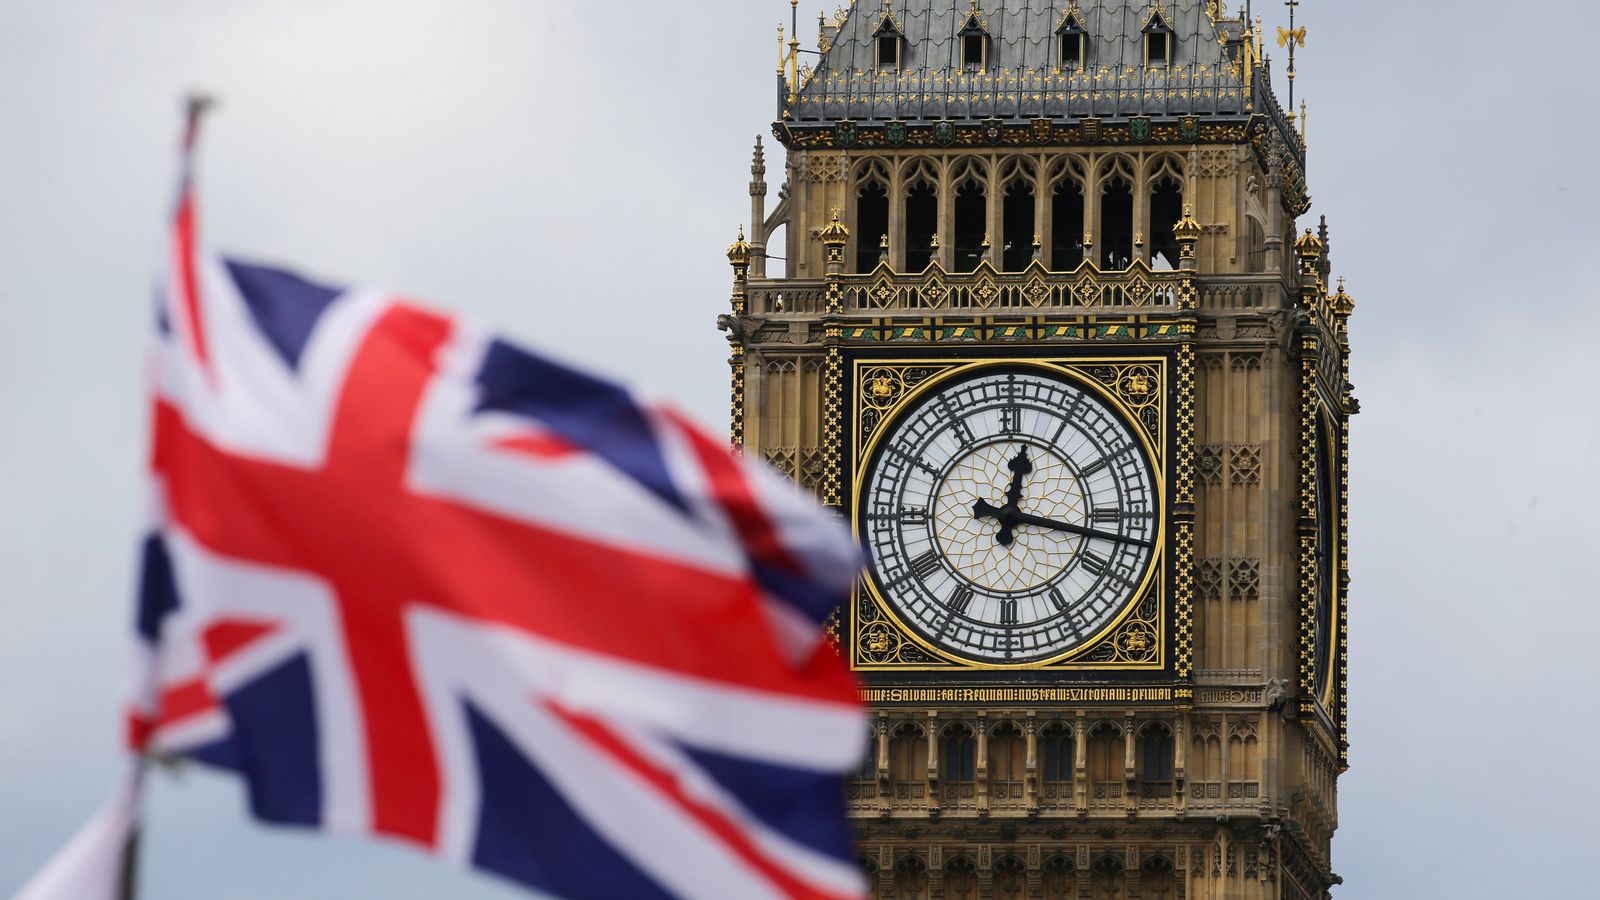 After nearly five years under wraps, is Big Ben ready to chime again? | UK News | Sky News